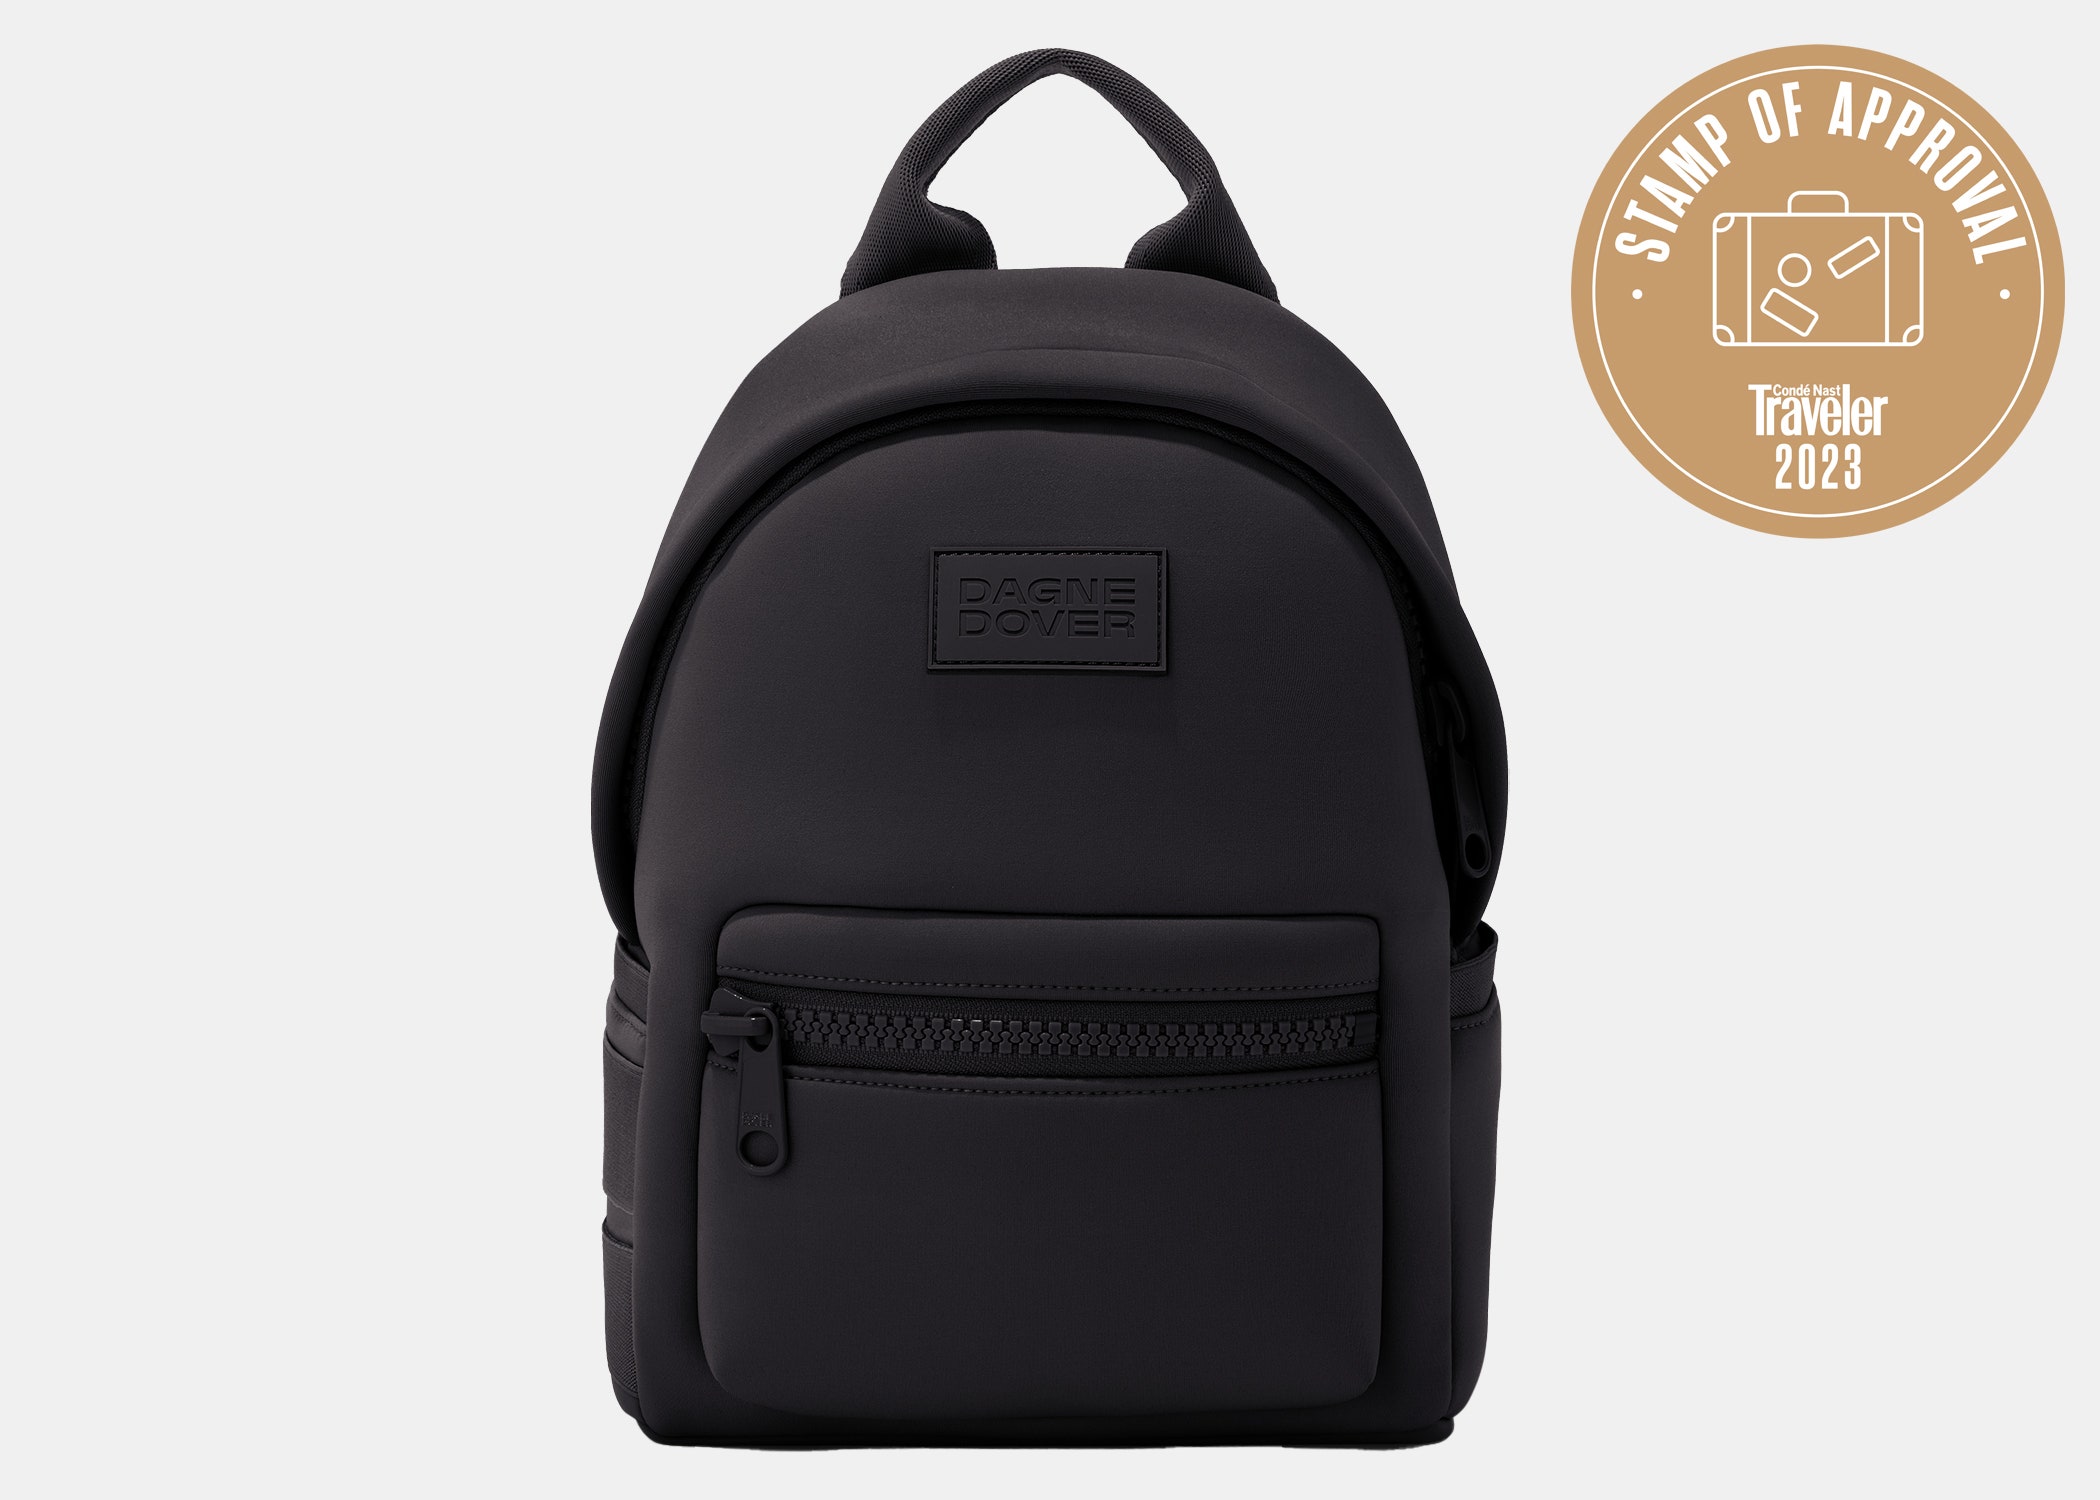 <p>Former <em>Traveler</em> editor <a href="https://www.cntraveler.com/contributor/alex-erdekian?mbid=synd_msn_rss&utm_source=msn&utm_medium=syndication">Alex Erdekian</a> has traveled with the Dagne Dover backpack to Mexico, <a href="https://www.cntraveler.com/destinations/italy?mbid=synd_msn_rss&utm_source=msn&utm_medium=syndication">Italy</a>, France, <a href="https://www.cntraveler.com/gallery/best-things-to-do-new-hampshire?mbid=synd_msn_rss&utm_source=msn&utm_medium=syndication">New Hampshire</a>, and <a href="https://www.cntraveler.com/destinations/boston?mbid=synd_msn_rss&utm_source=msn&utm_medium=syndication">Boston</a> to name a few. There are several pockets inside and it expands enough to fit a weekend’s worth of clothing. It’s extremely light when unpacked and the foamy exterior straps don’t dig into your shoulders and evenly distributes the weight of the backpack. It's made from neoprene and Performance Air Mesh which was a selling point for Erdekian. "The look of this backpack is a major part of why I use it so much. Something about the neoprene foam look feels really modern and fresh. It also looks so simple and free of distractions, whilst being tricked out with all these hidden bells and whistles on the inside,” she says.</p> <p><strong>Pros:</strong> Spacious, comfortable, chic design<br> <strong>Cons:</strong> There are almost <em>too</em> many pockets inside and the black neoprene can get a little scuffed</p> $155, Dagne Dover. <a href="https://www.dagnedover.com/collections/the-dakota-backpack">Get it now!</a><p>Sign up to receive the latest news, expert tips, and inspiration on all things travel</p><a href="https://www.cntraveler.com/newsletter/the-daily?sourceCode=msnsend">Inspire Me</a>